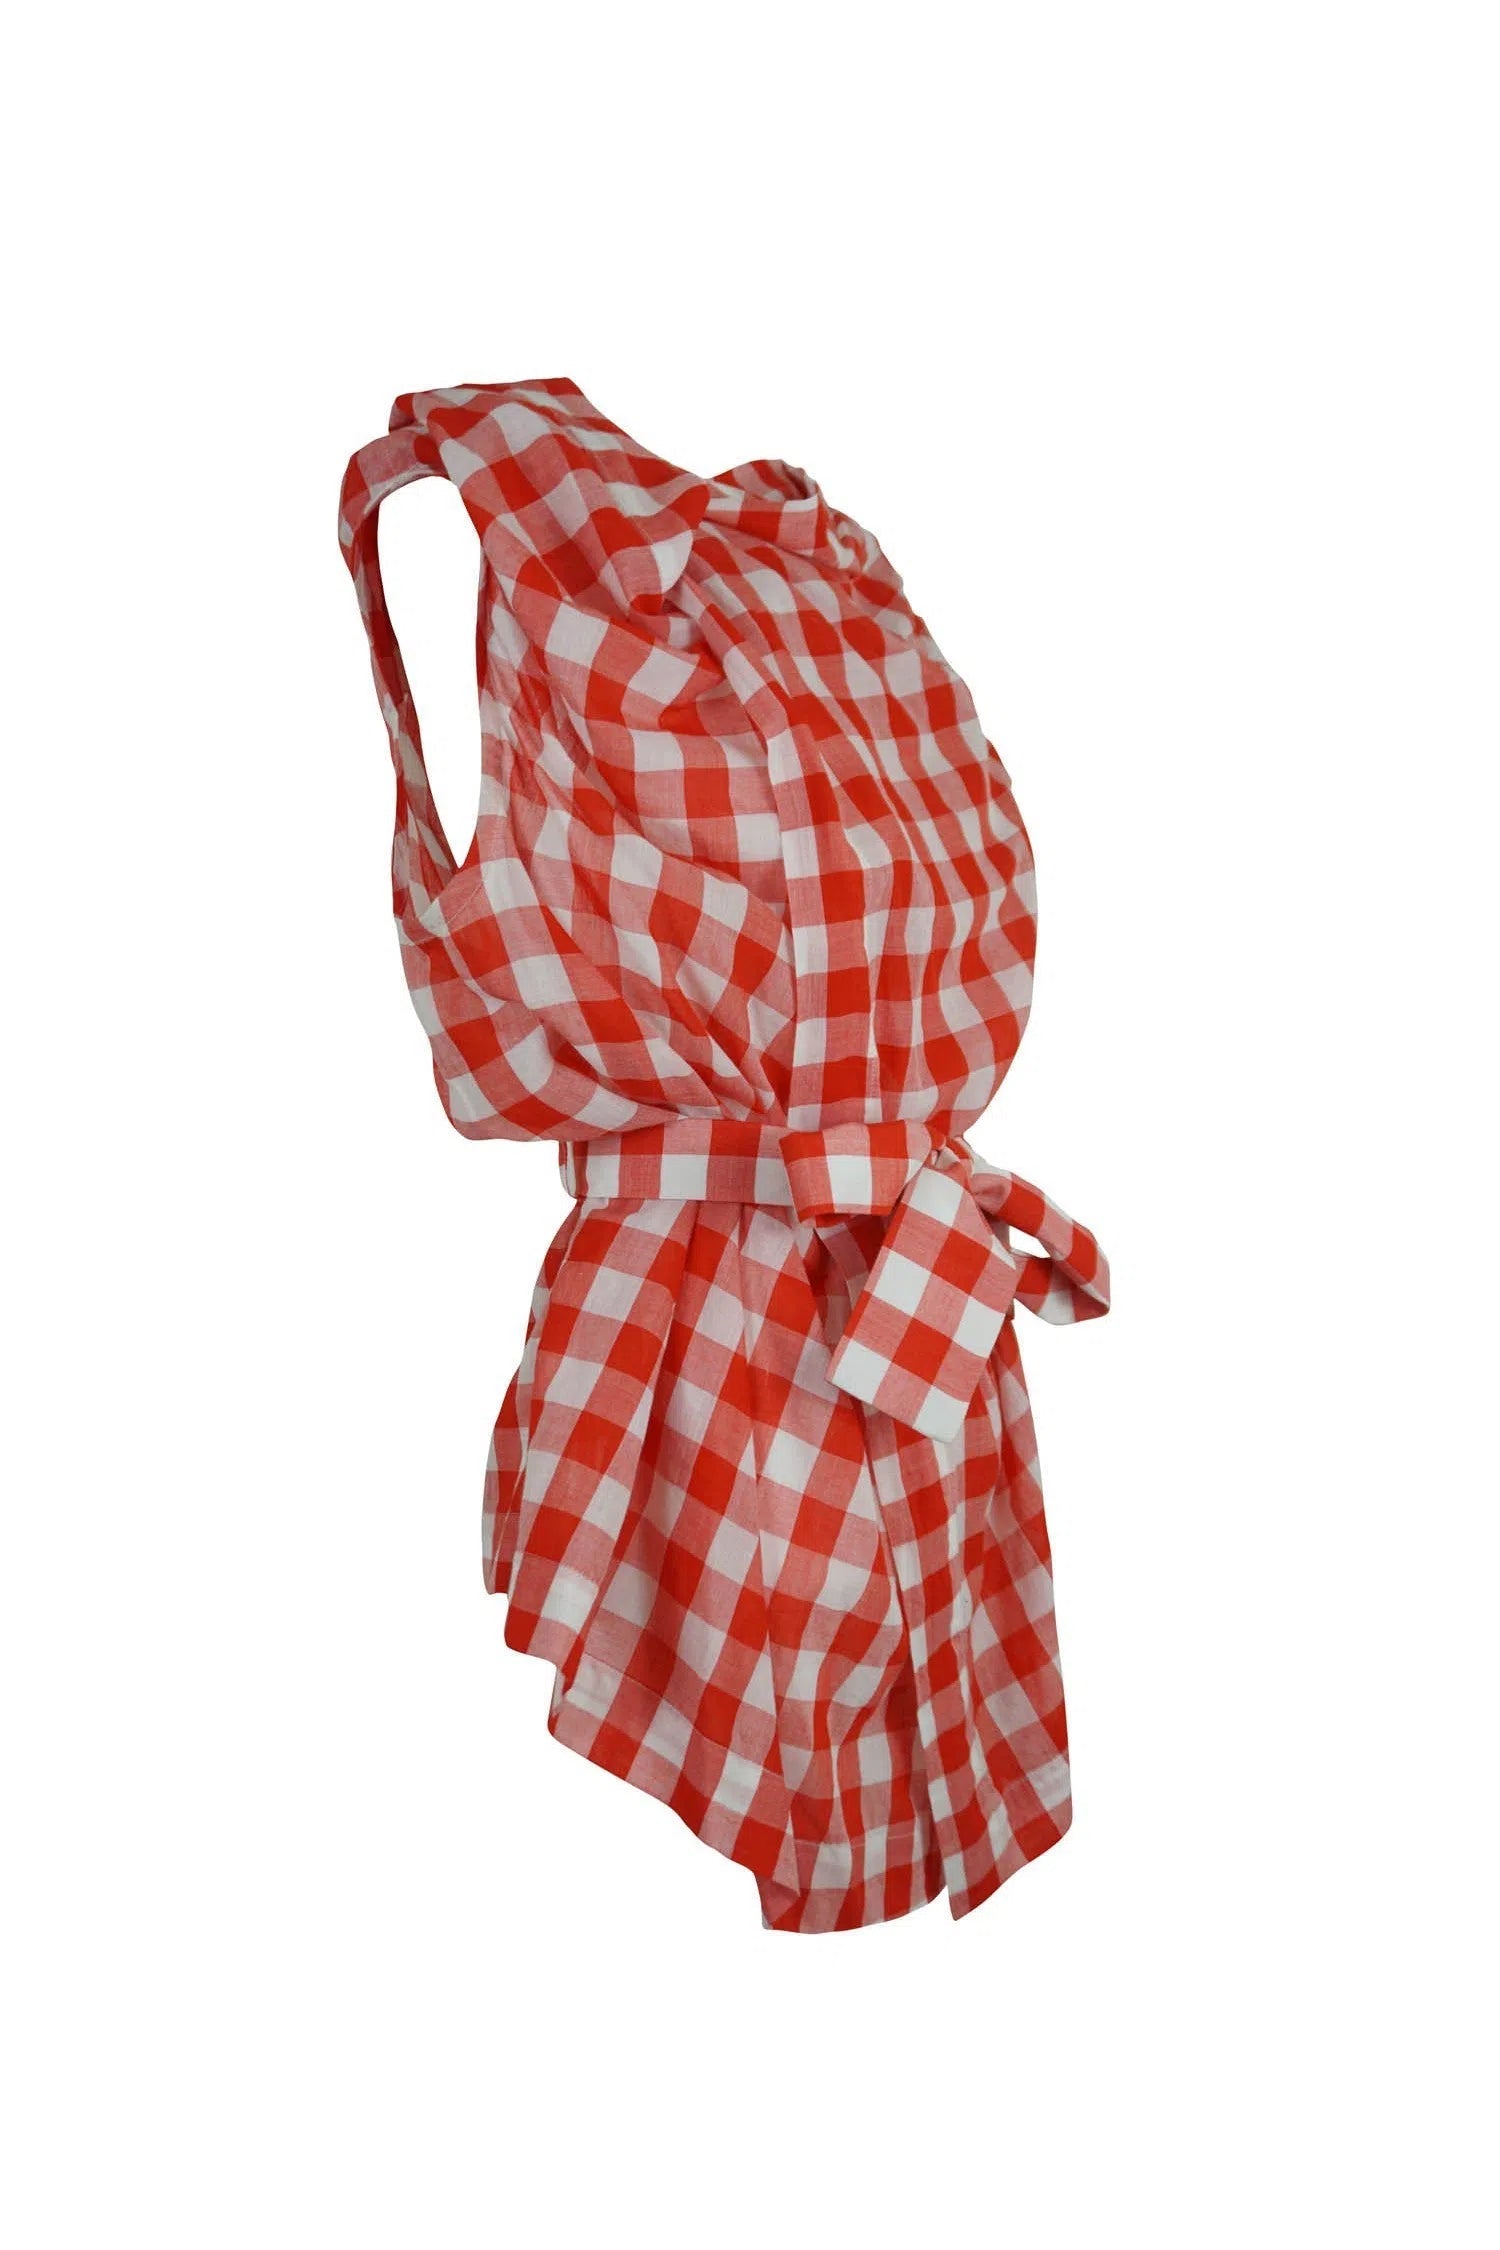 Vivienne Westwood Gingham Draped Blouse - Foxy Couture Carmel